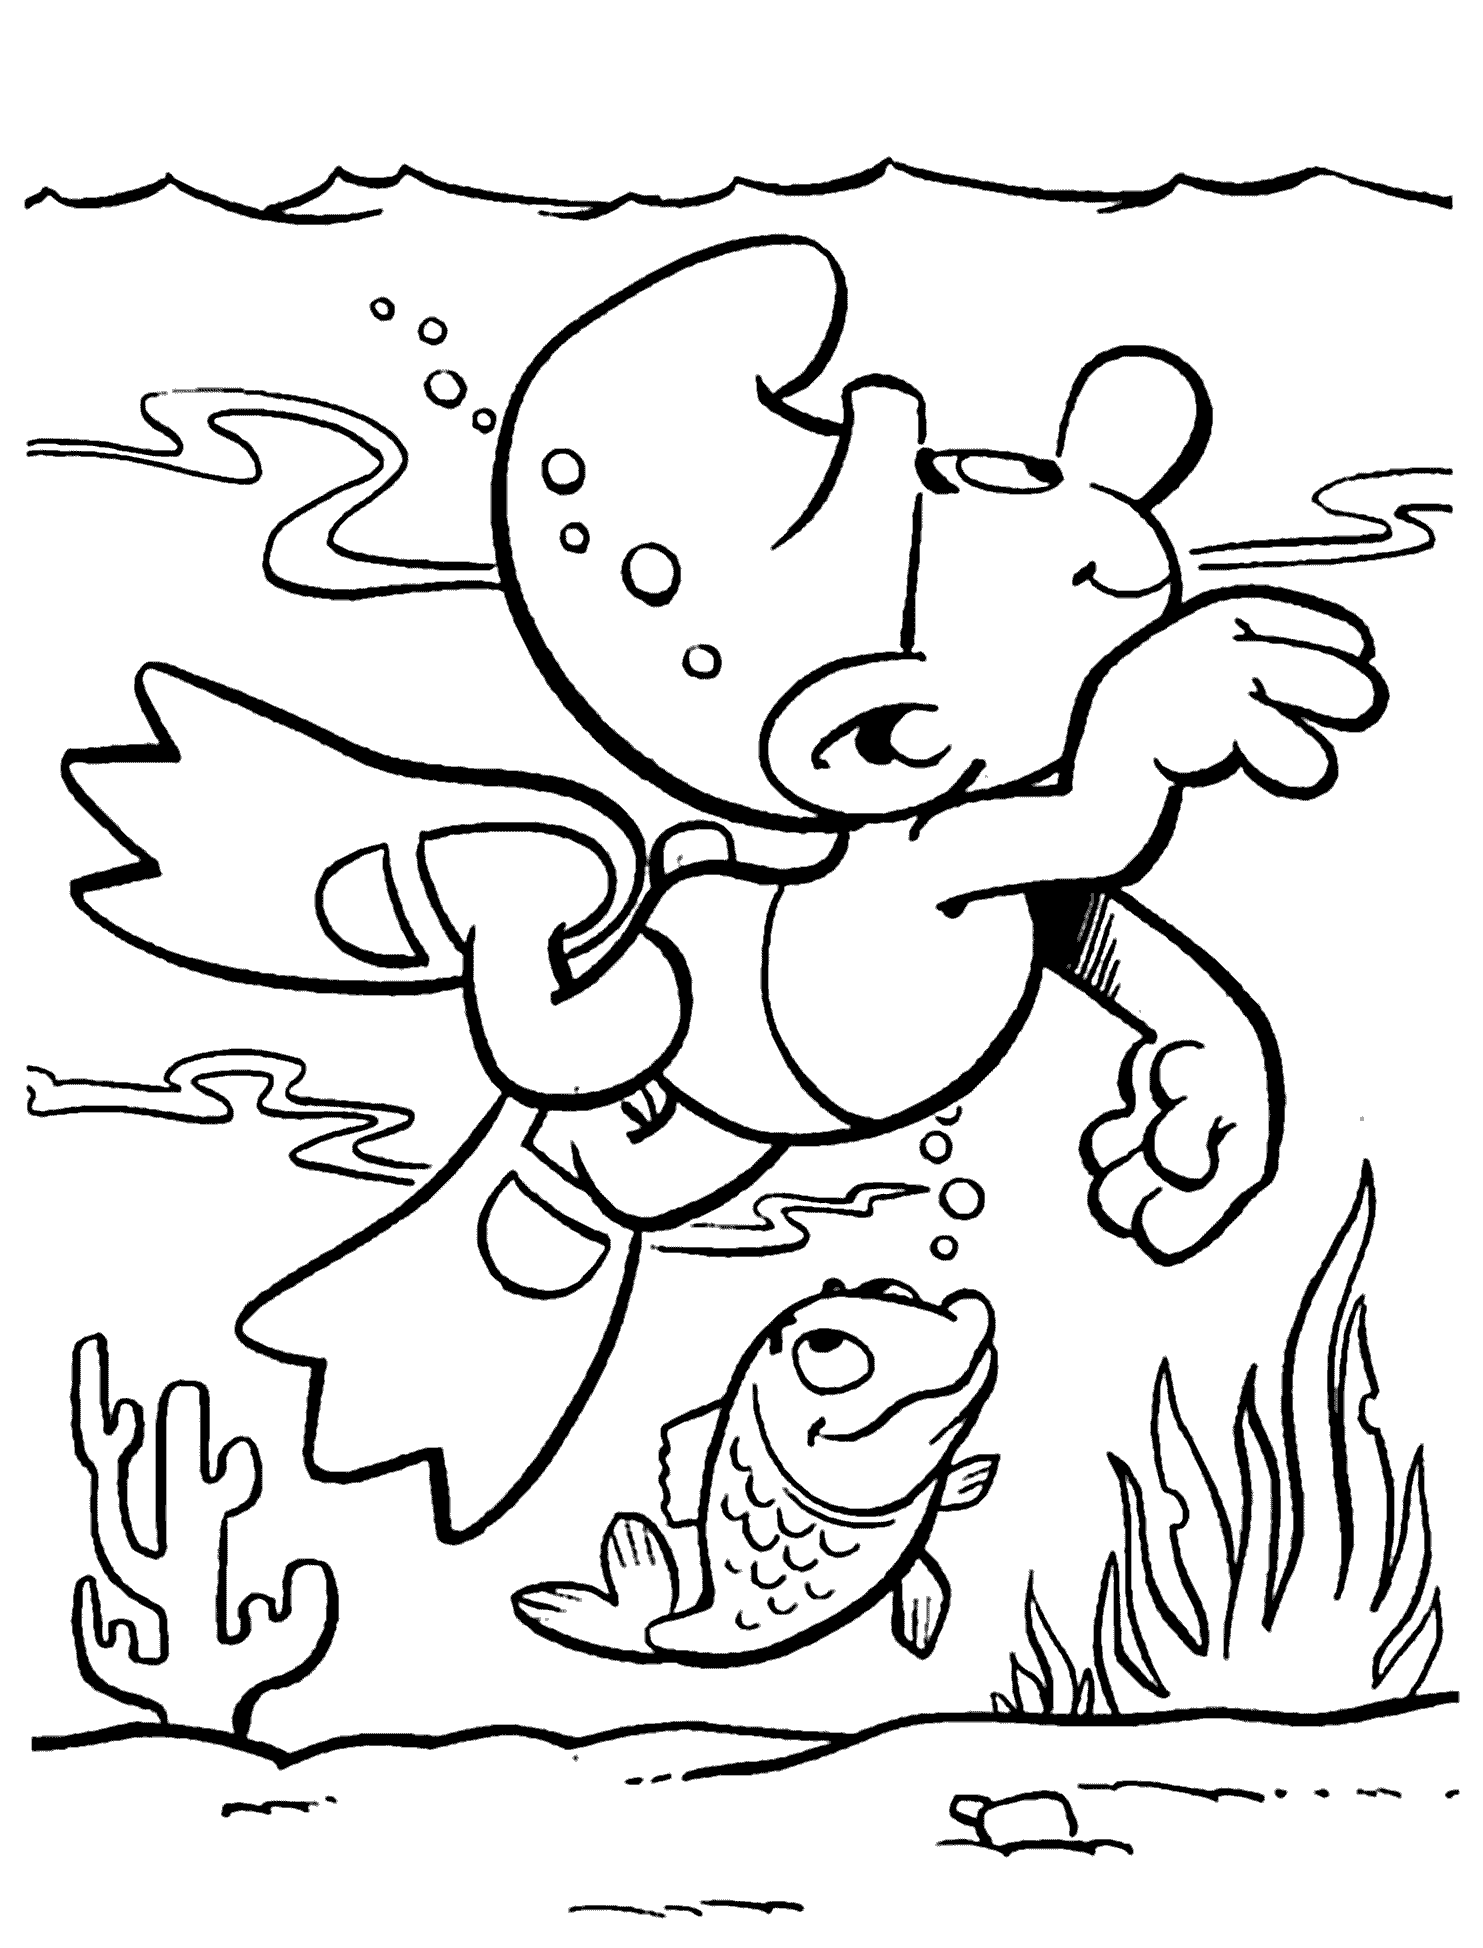 smurf pictures the smurf coloring pages for kids printable free pictures smurf 